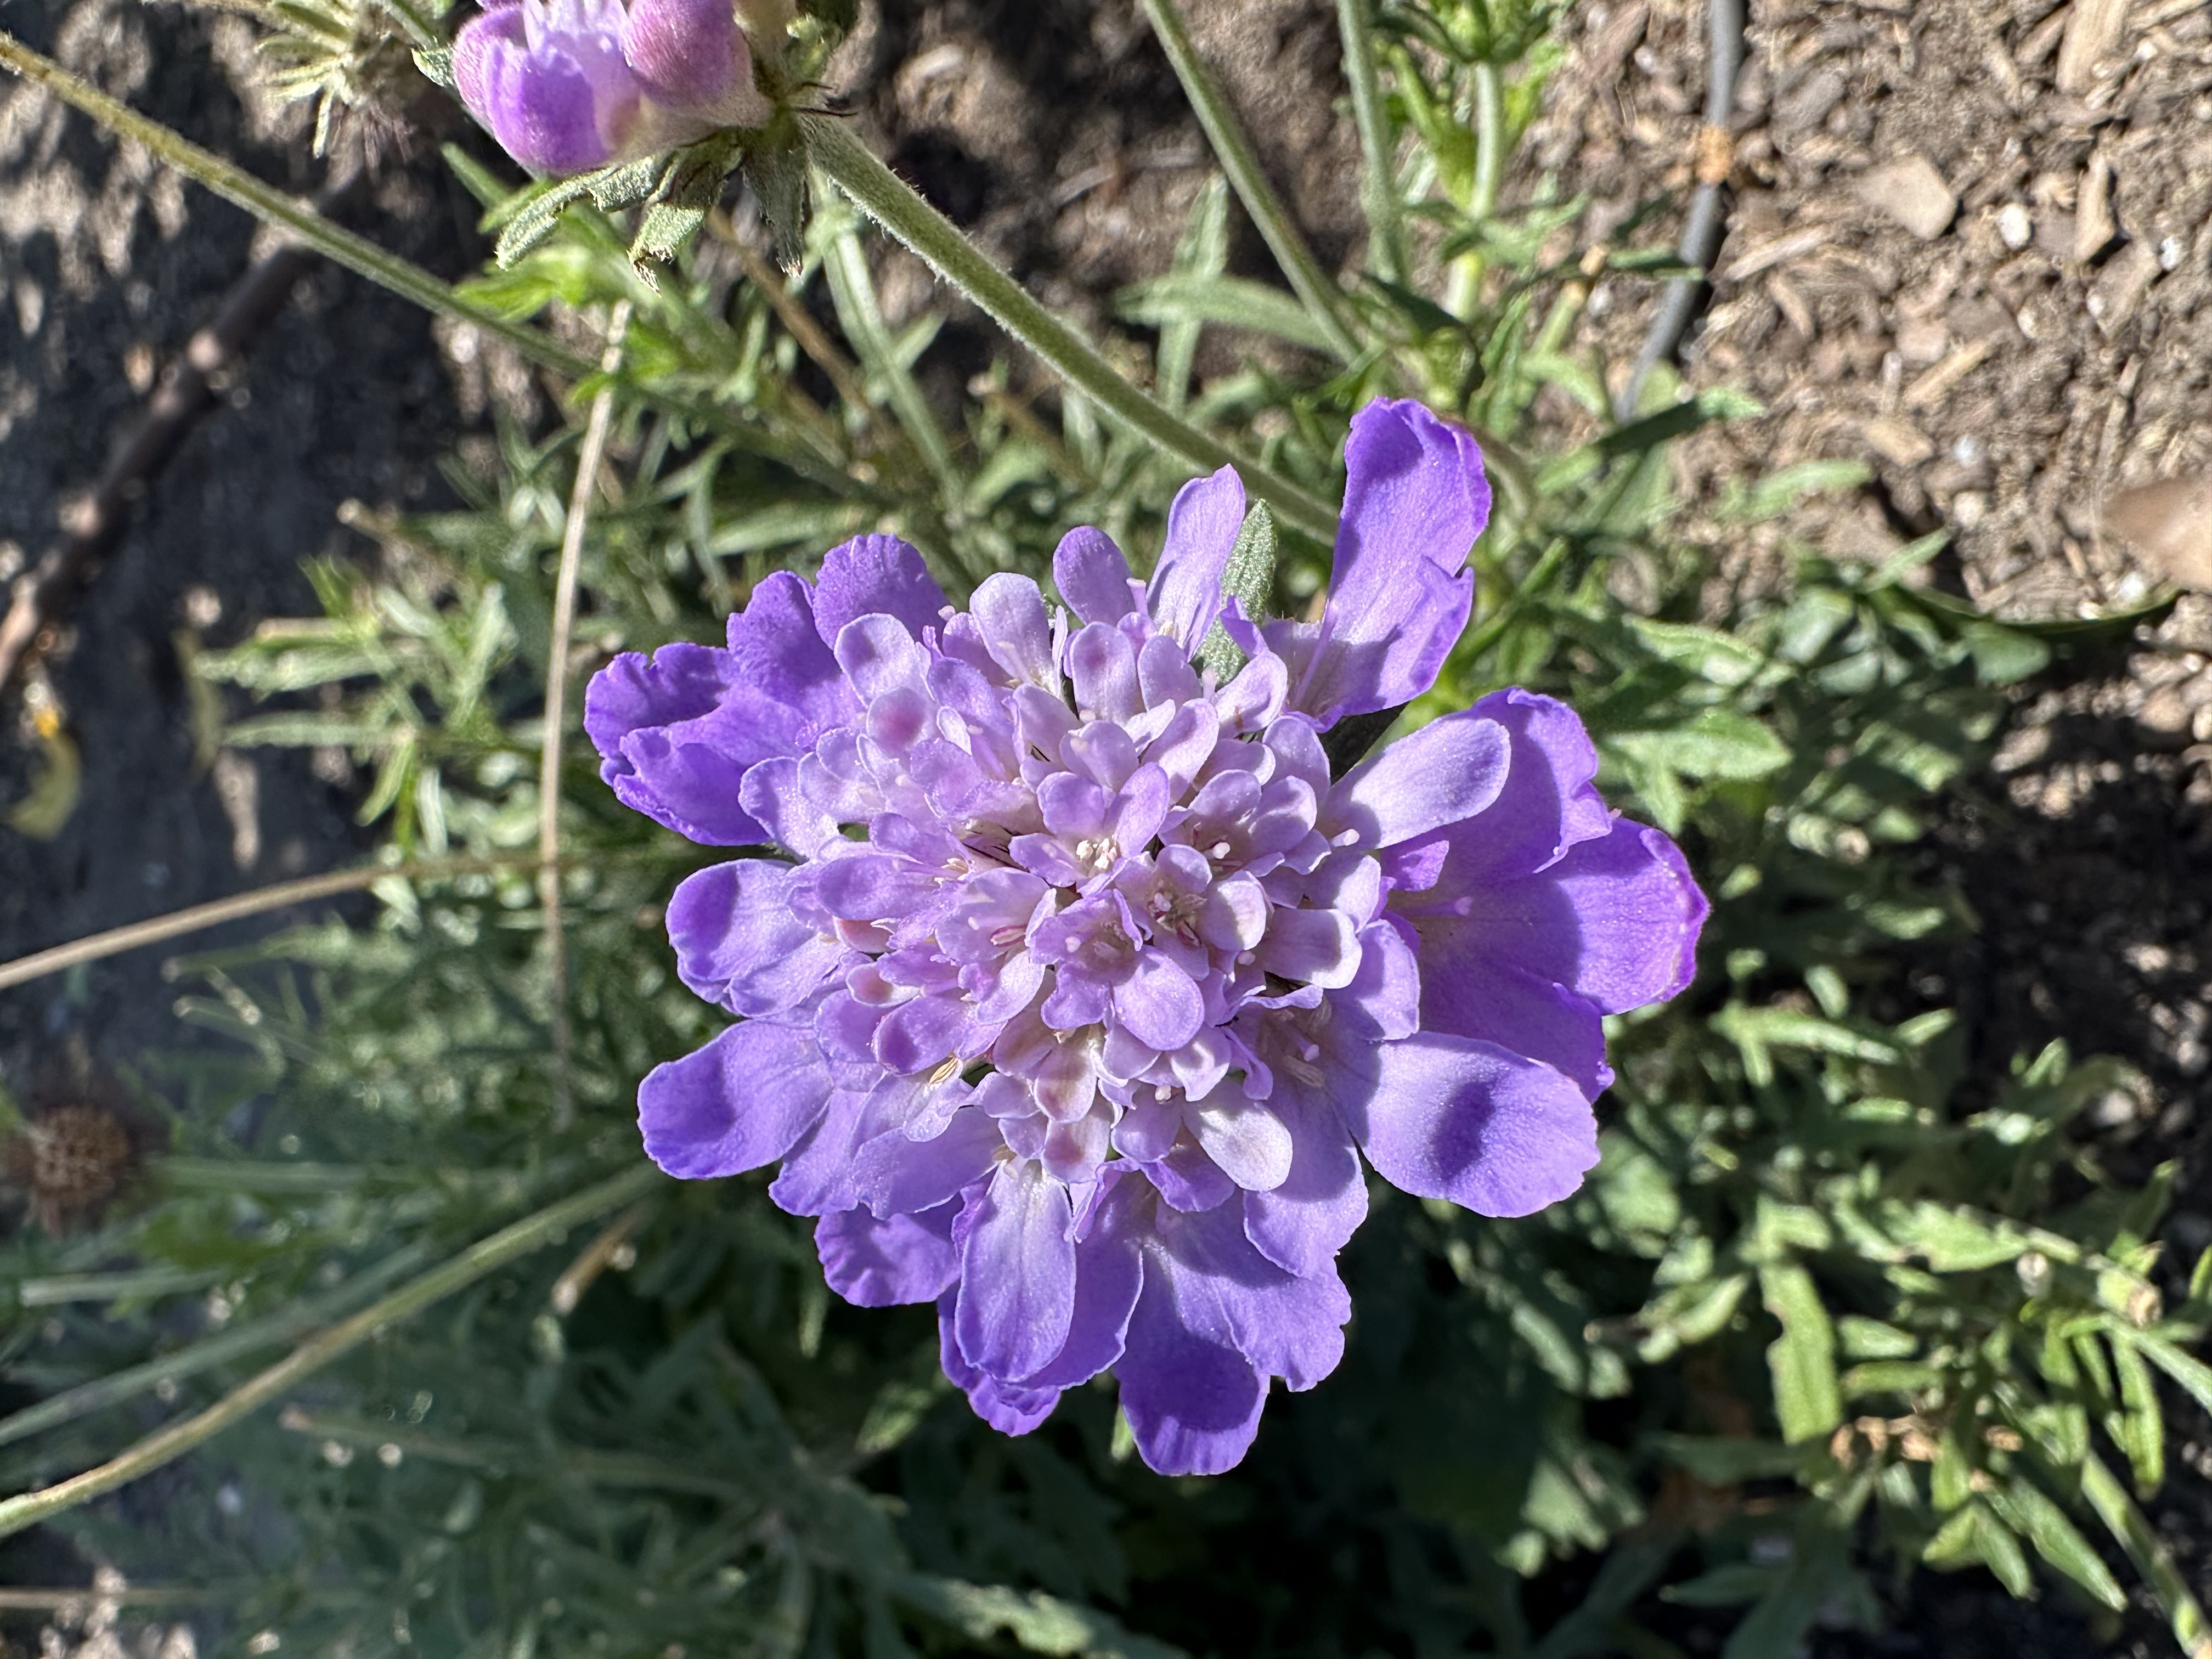 Mariposa Blue Scabiosa have delicate purple flowers with green foliage